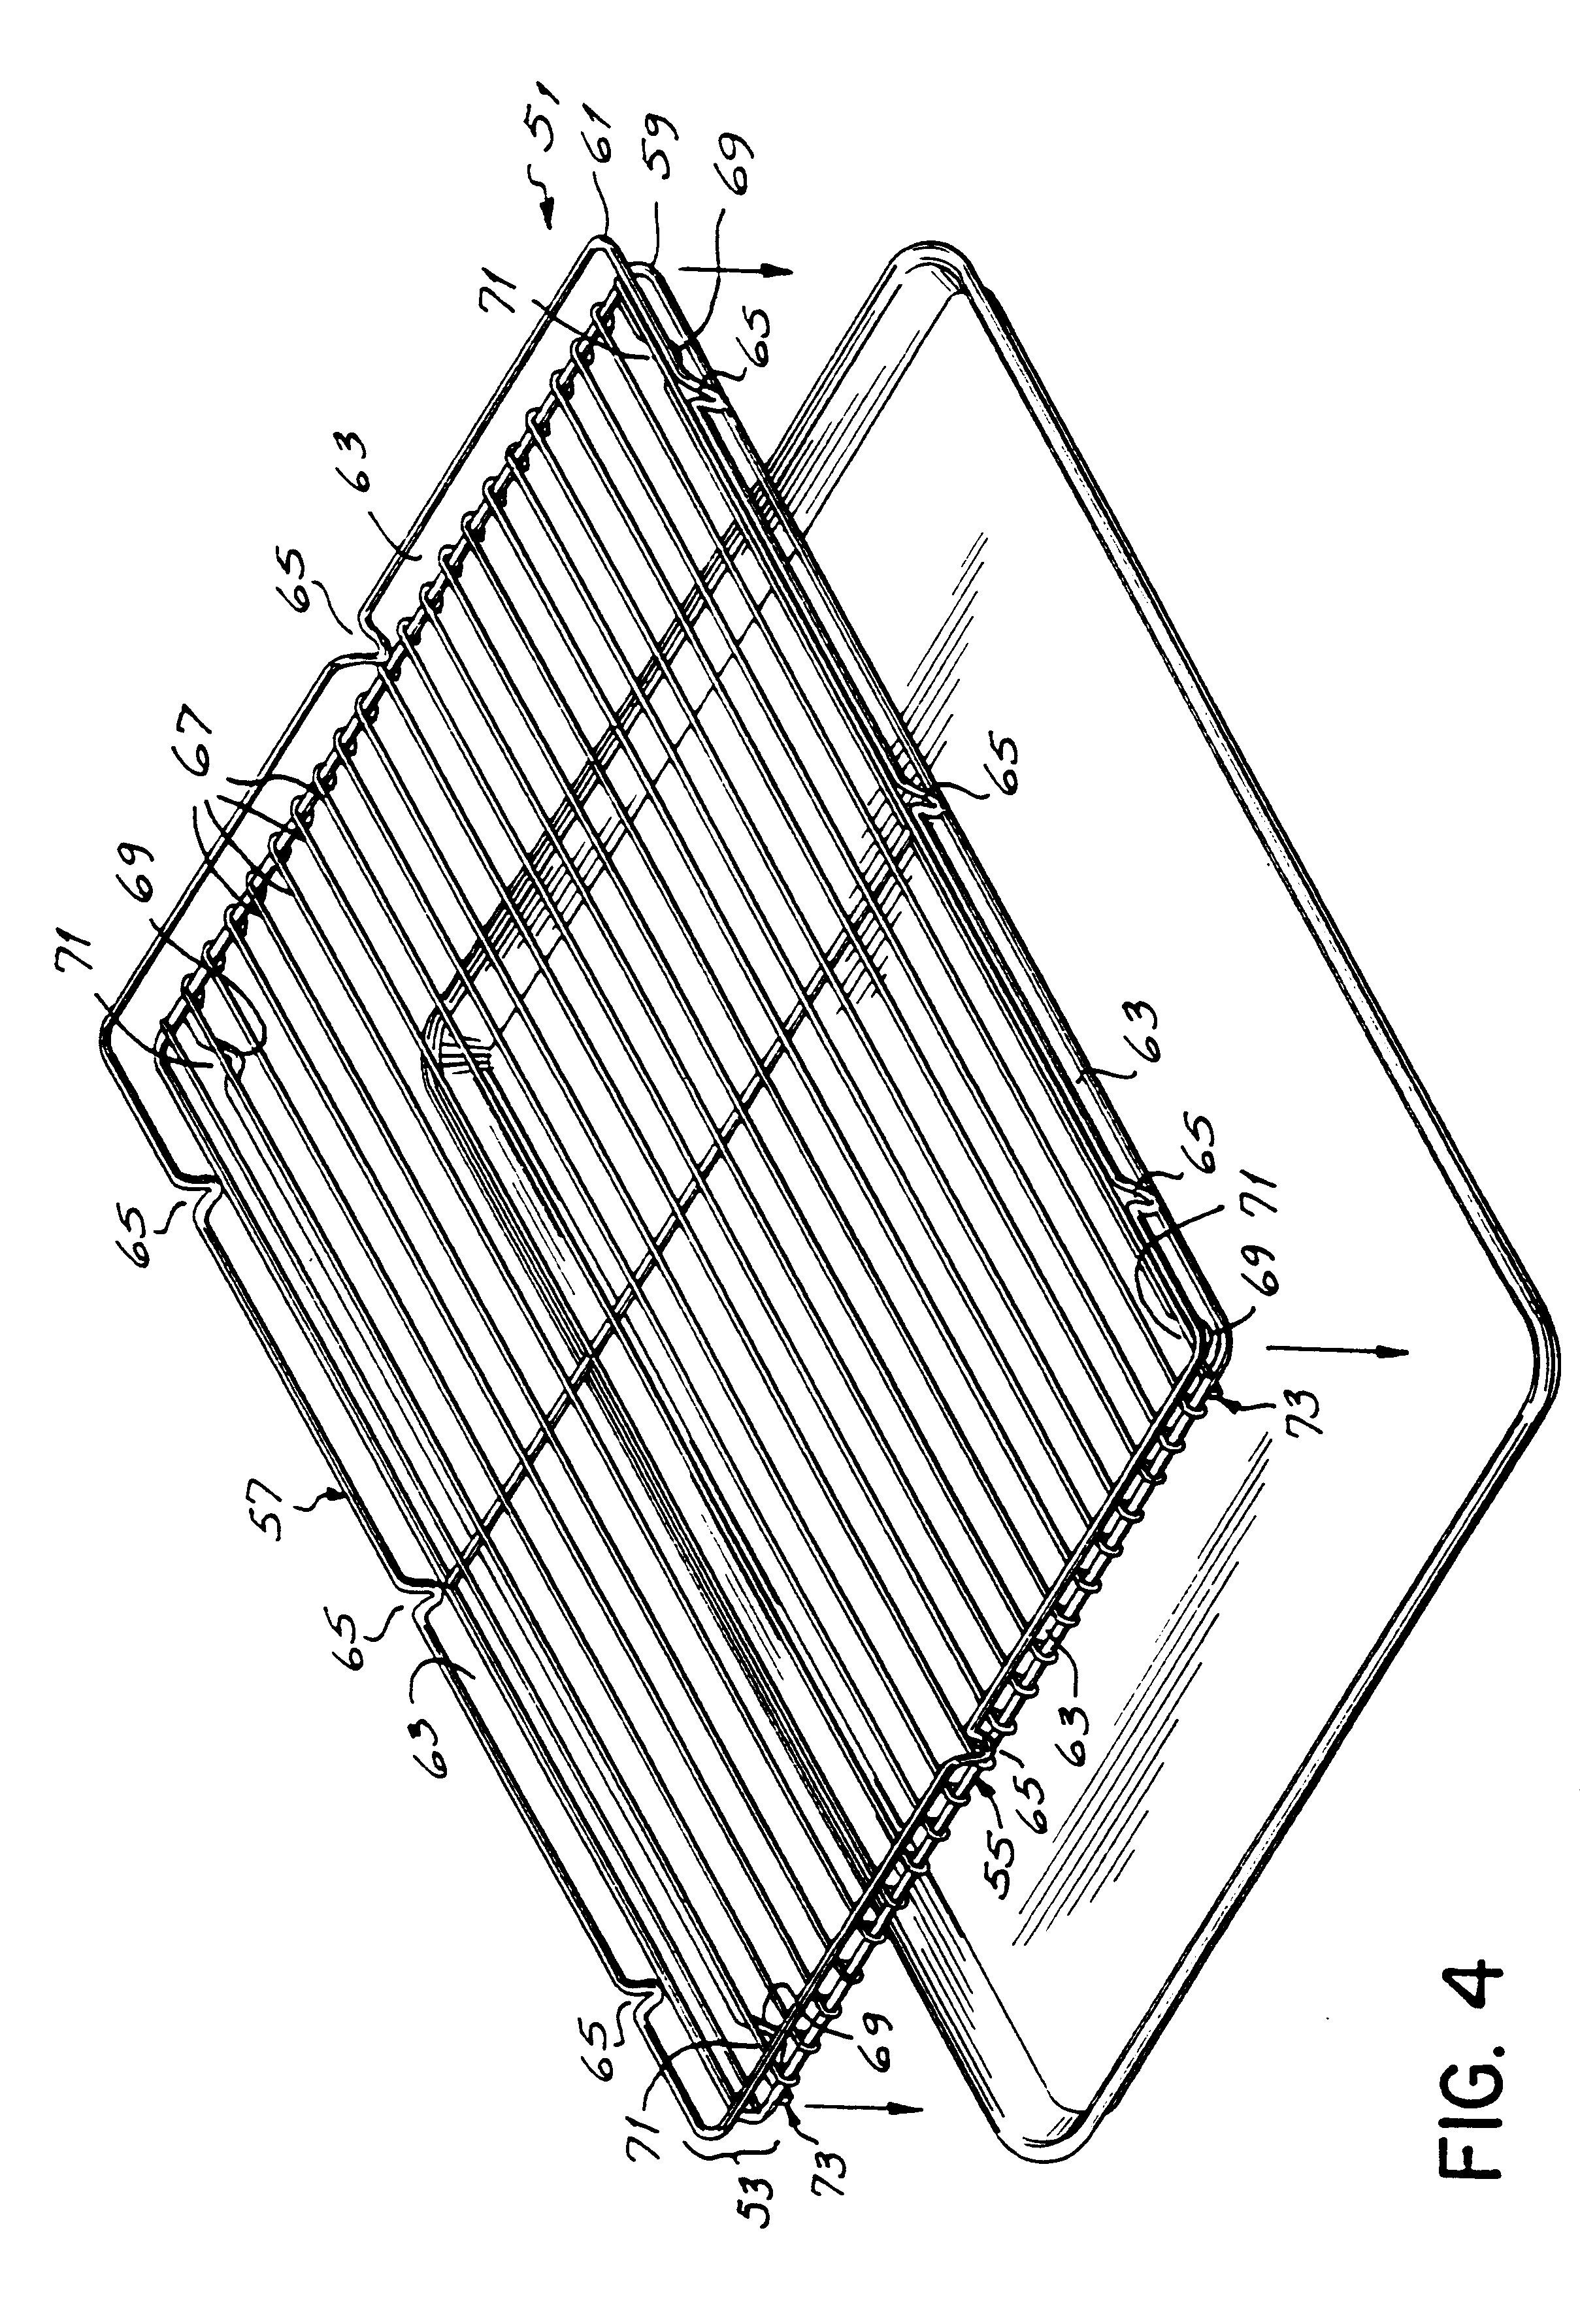 Method for heating (frying) and subsequently supporting or displaying food